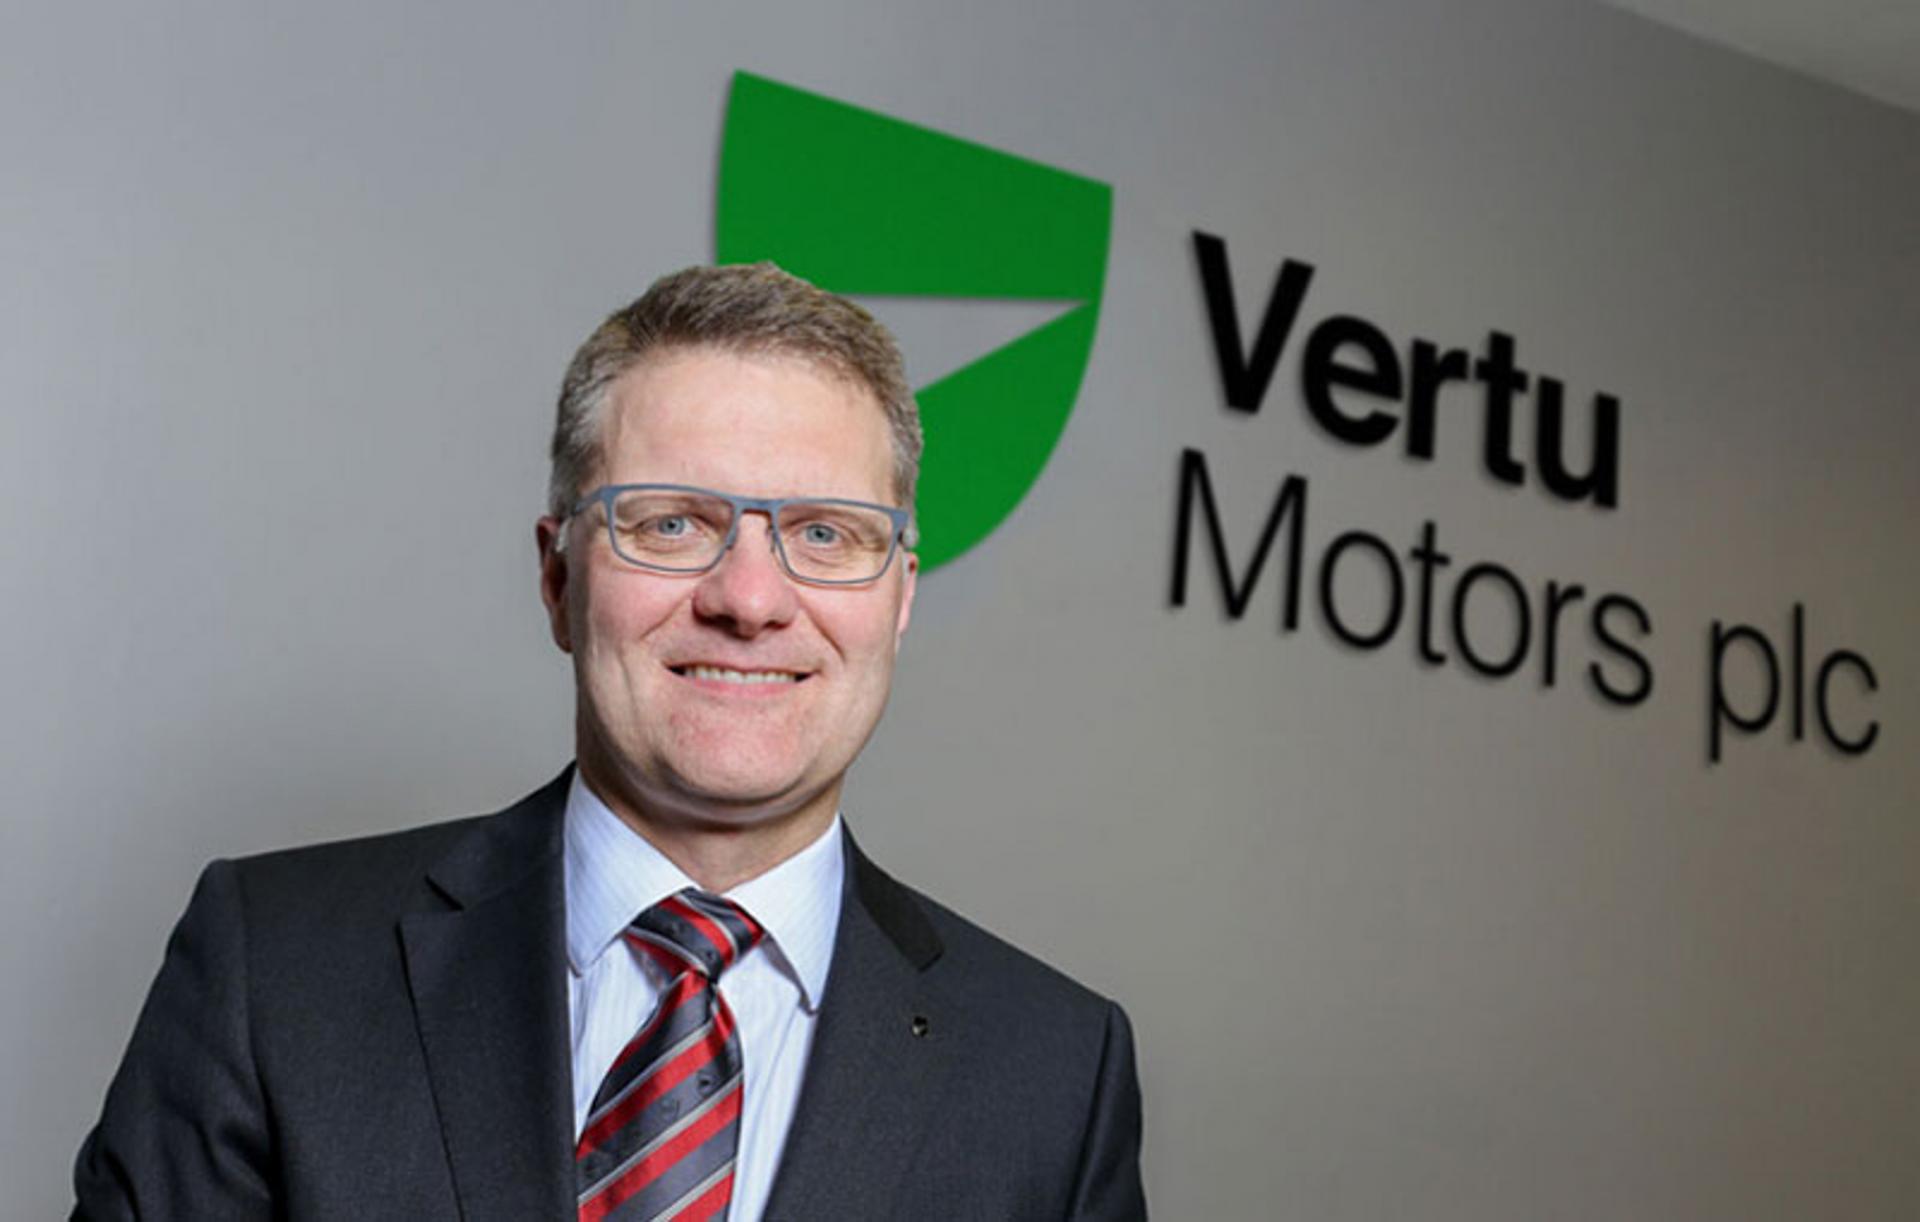 Vertu Motors plans further acquisitions after solid H1 performance